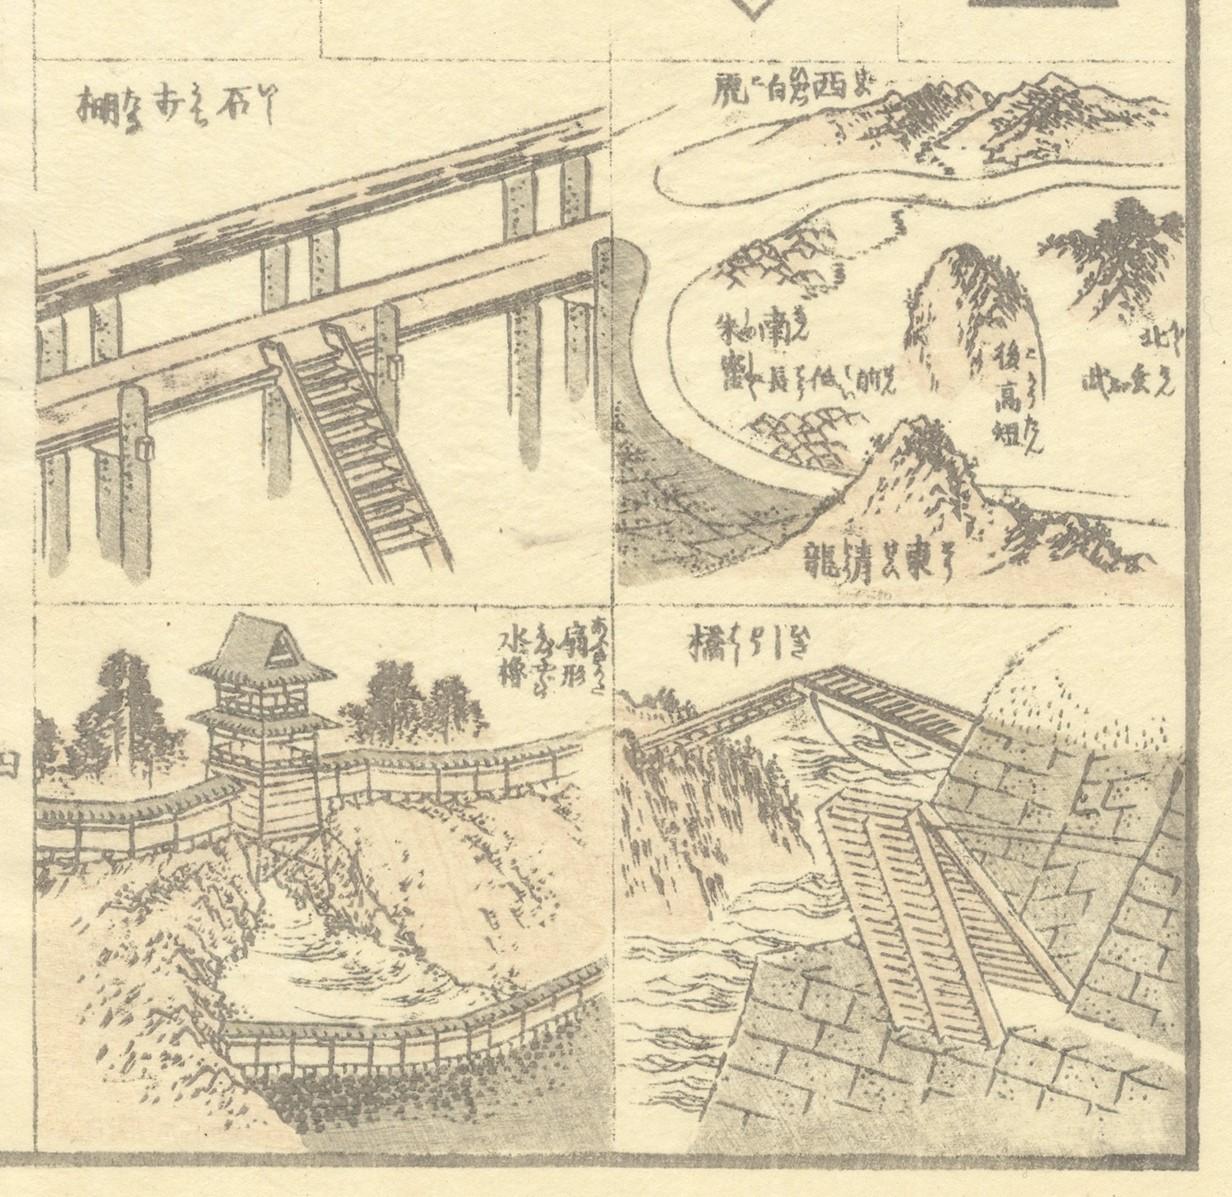 Artist: Katsushika Hokusai
Title: Architecture Sketches
Series: Hokusai Manga Volume 9
Publisher: Toheki-do
Date: 1814-1878
Size: 22.8 x 15.8 cm
Condition report: Trimmed on the left side, binding holes on the right margin.

This print is from the